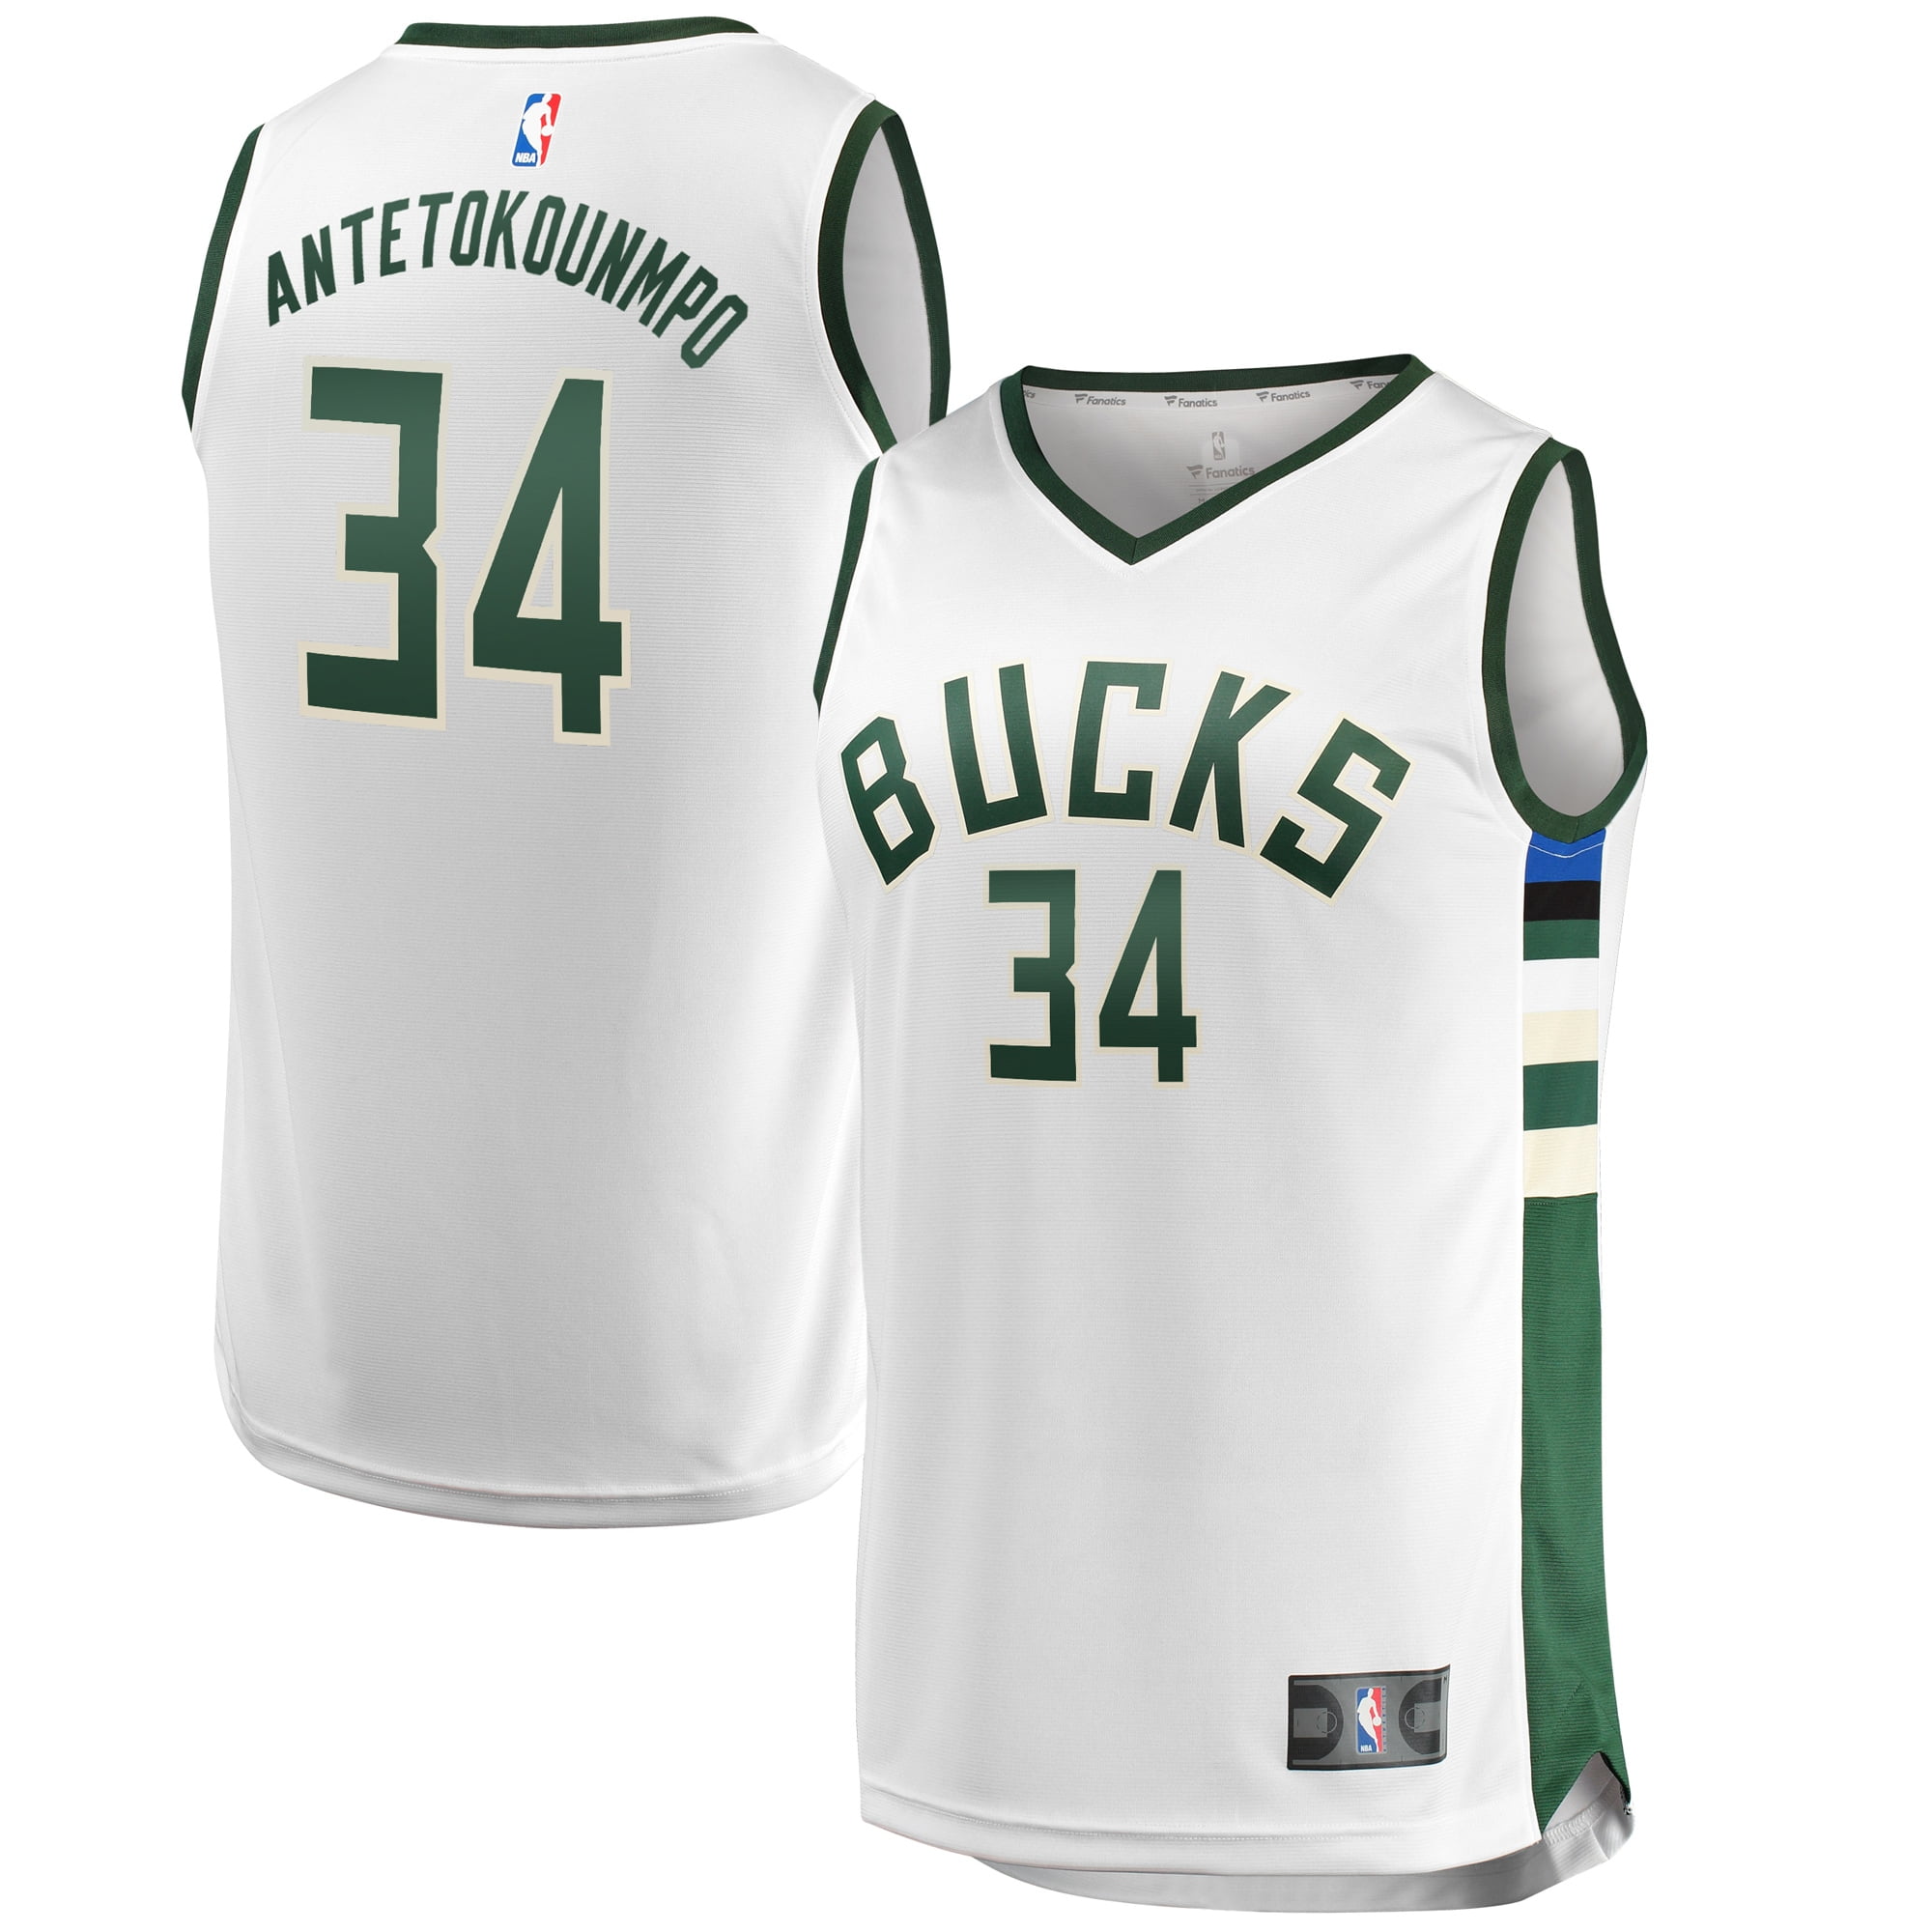 all white giannis jersey